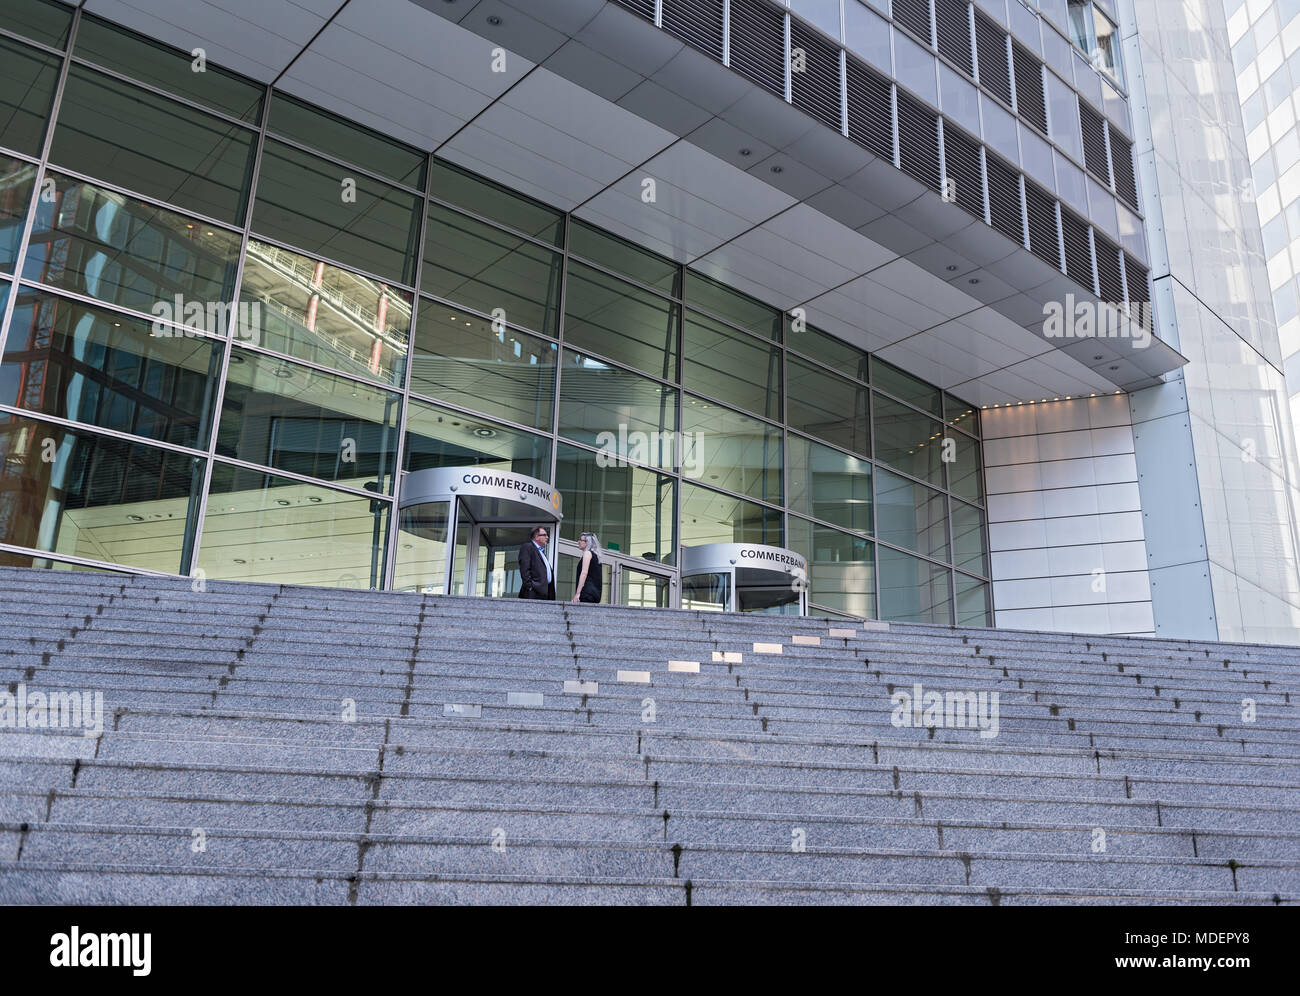 entrance of the commerzbank ag headquarters in frankfurt am main, germany Stock Photo